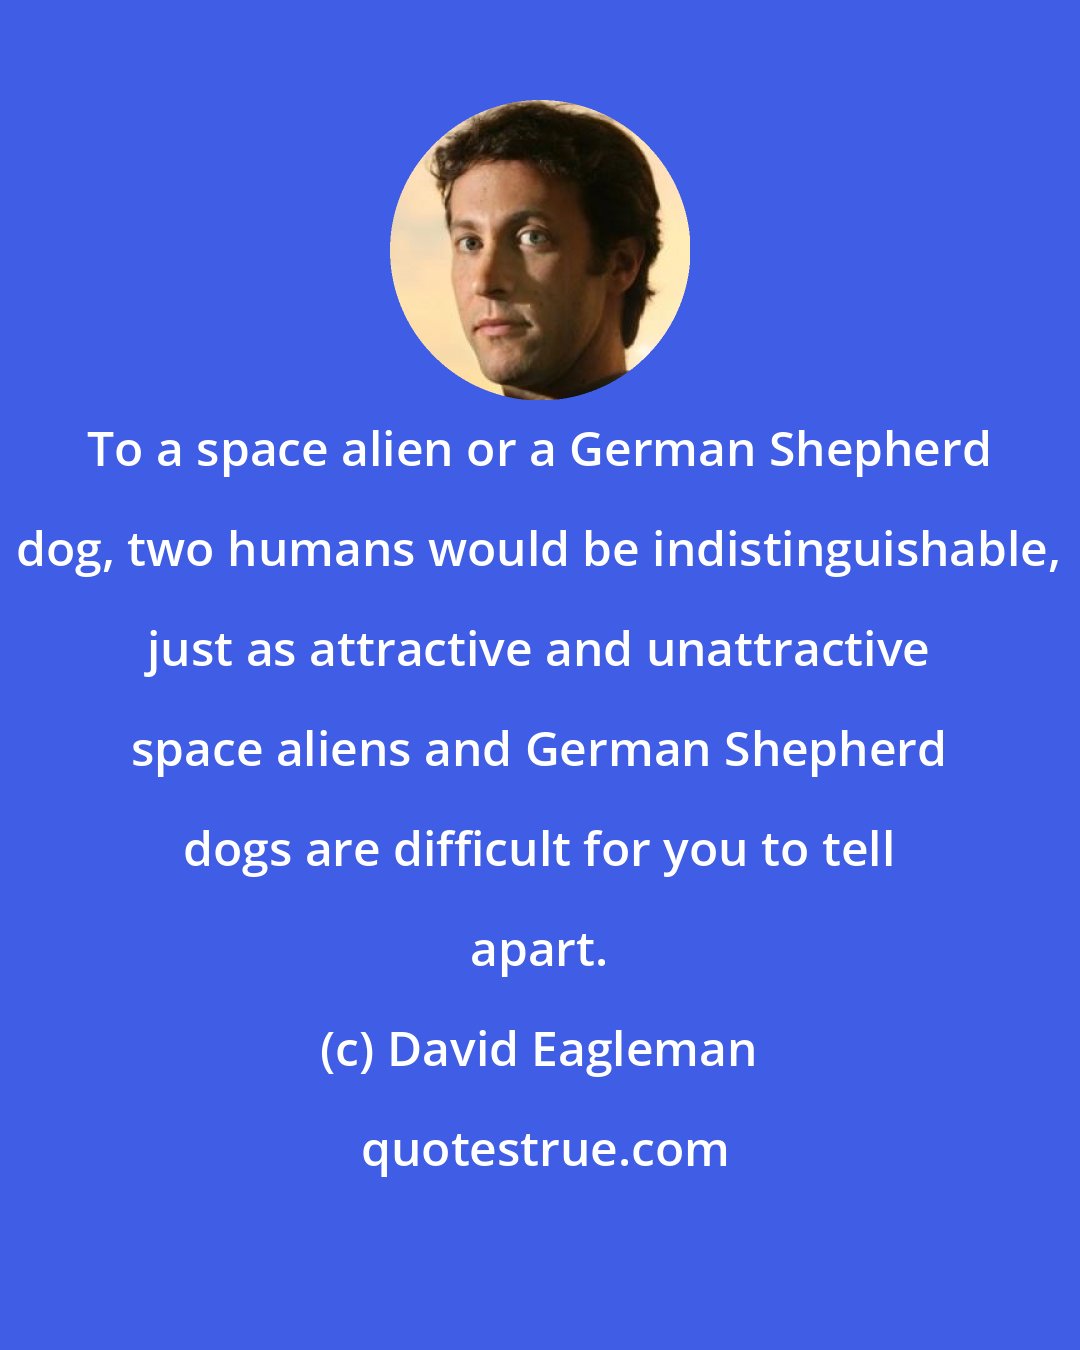 David Eagleman: To a space alien or a German Shepherd dog, two humans would be indistinguishable, just as attractive and unattractive space aliens and German Shepherd dogs are difficult for you to tell apart.